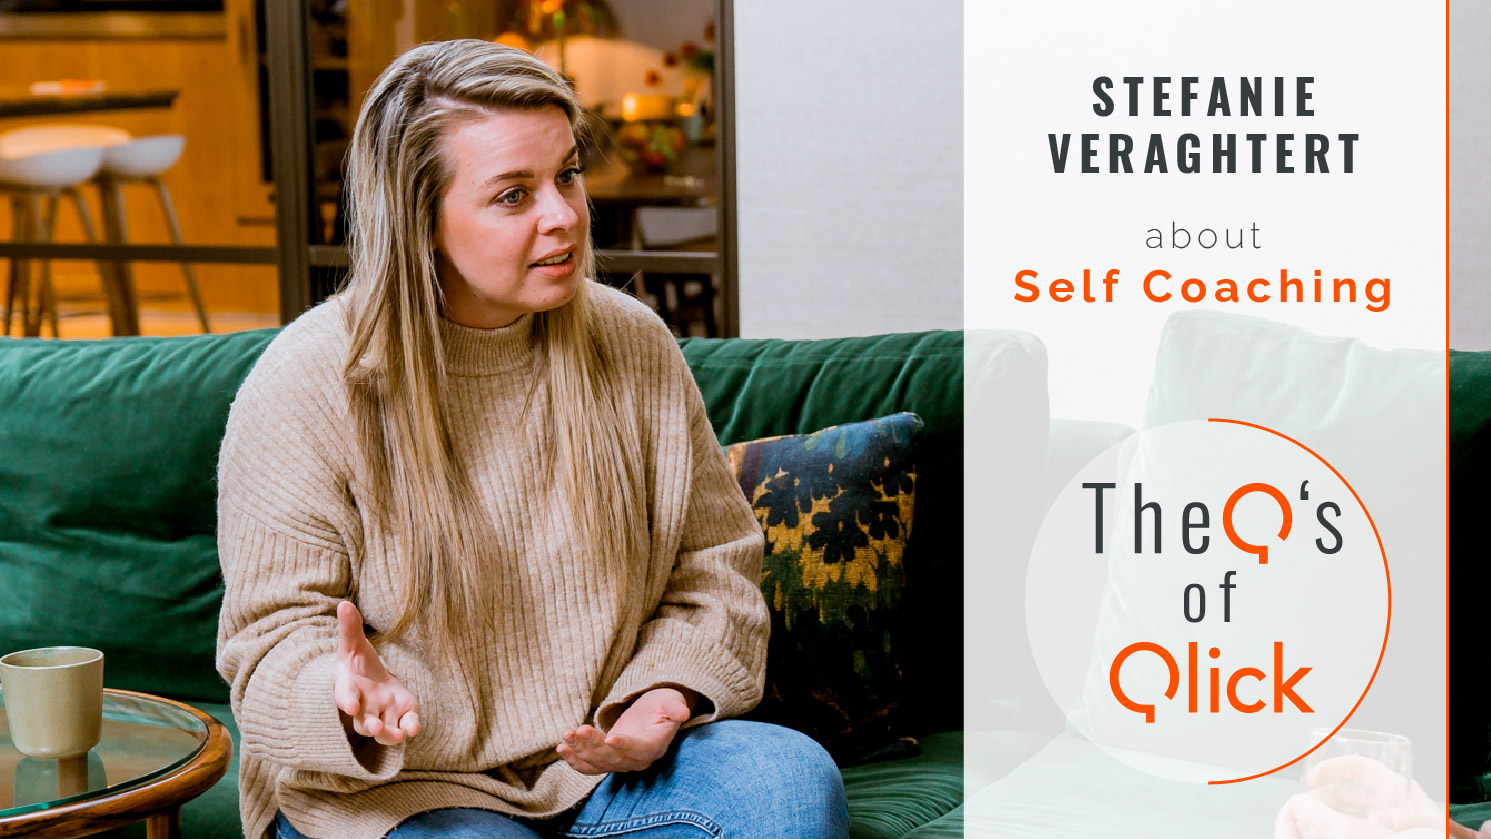 The Q's of Qlick: The importance of self-coaching as a leader